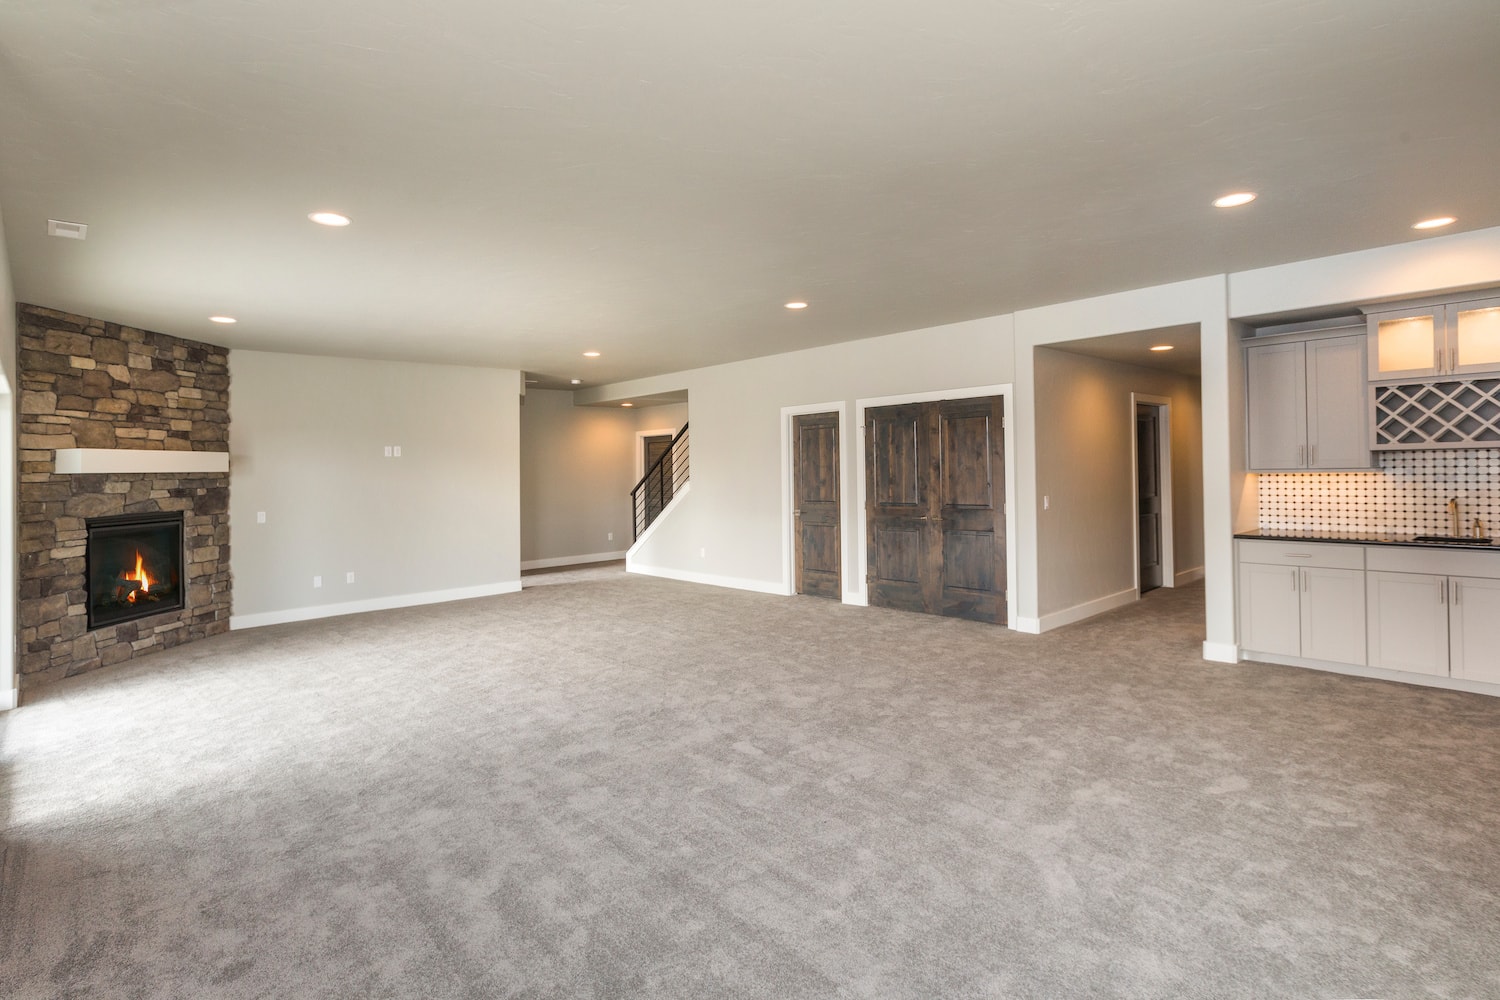 basement remodel on a budget large carpeted floor